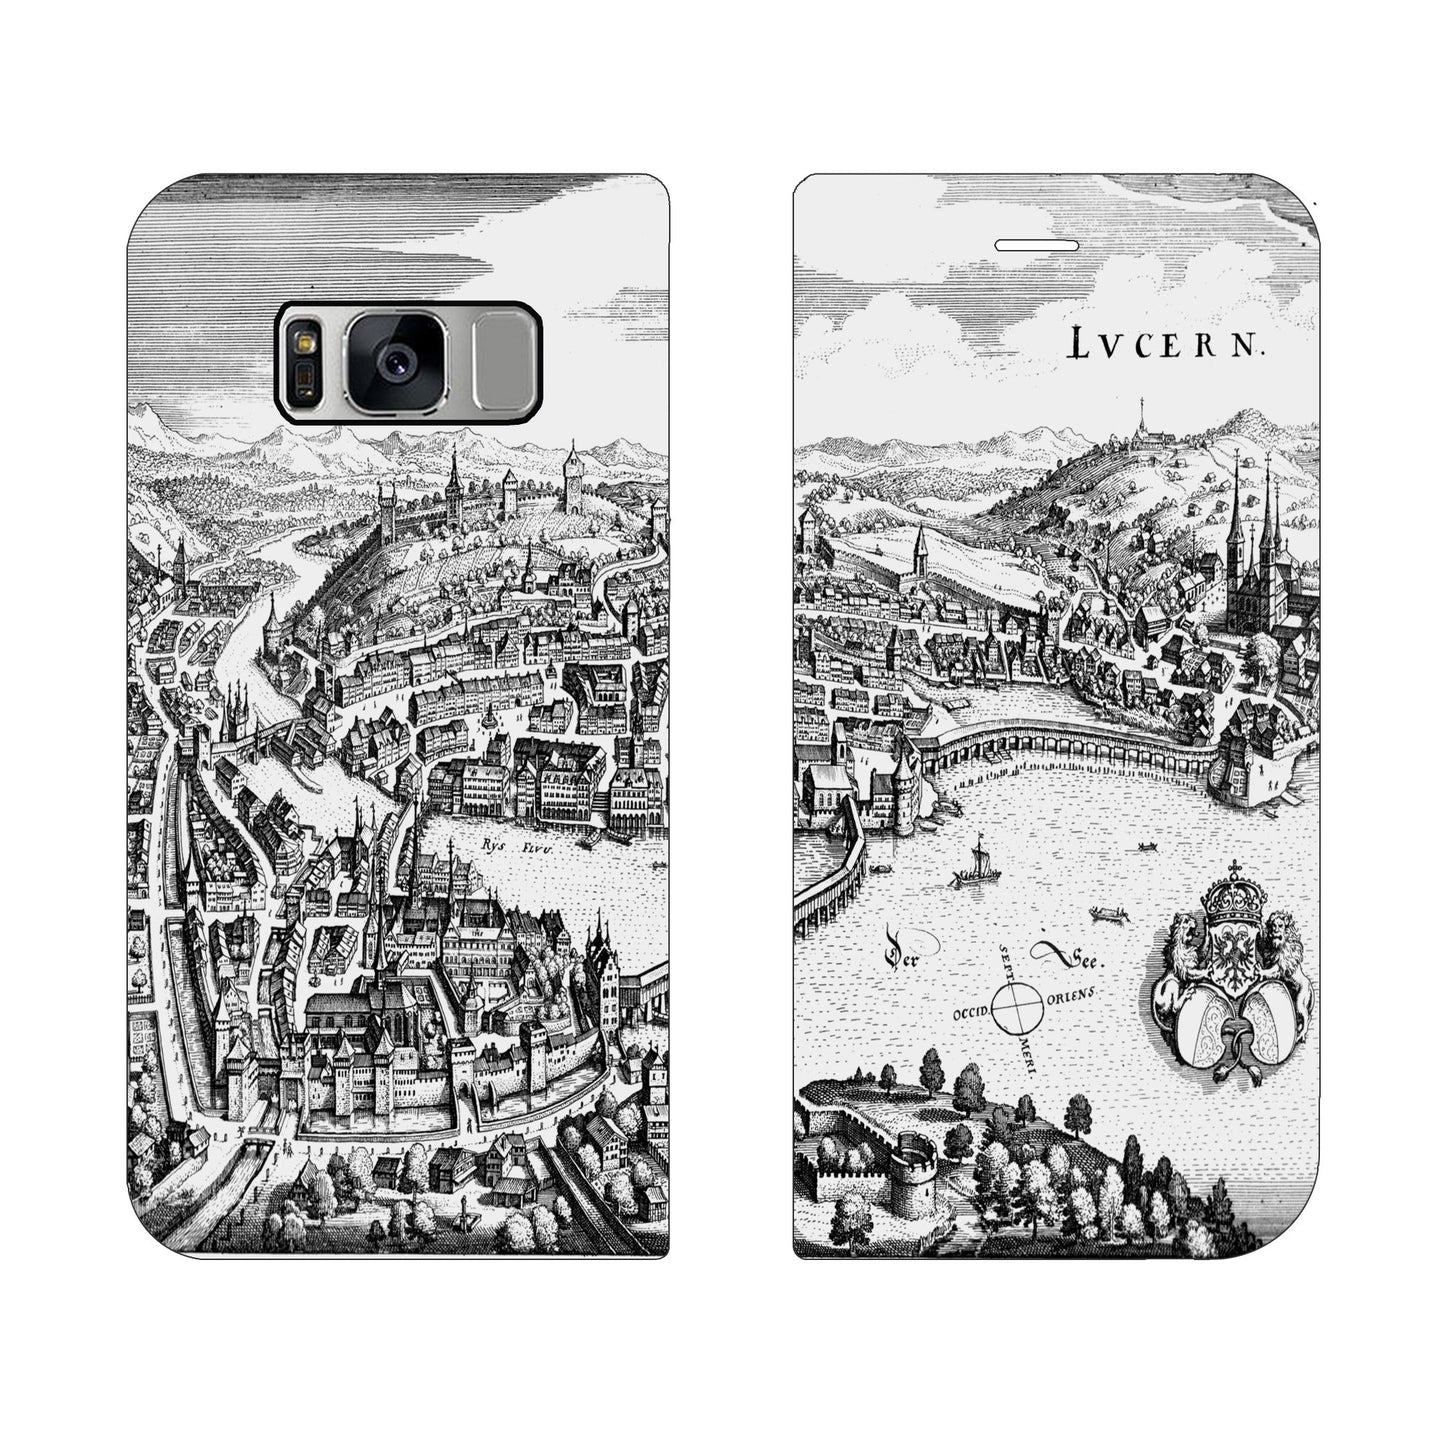 Lucerne Merian Panorama Case for iPhone and Samsung